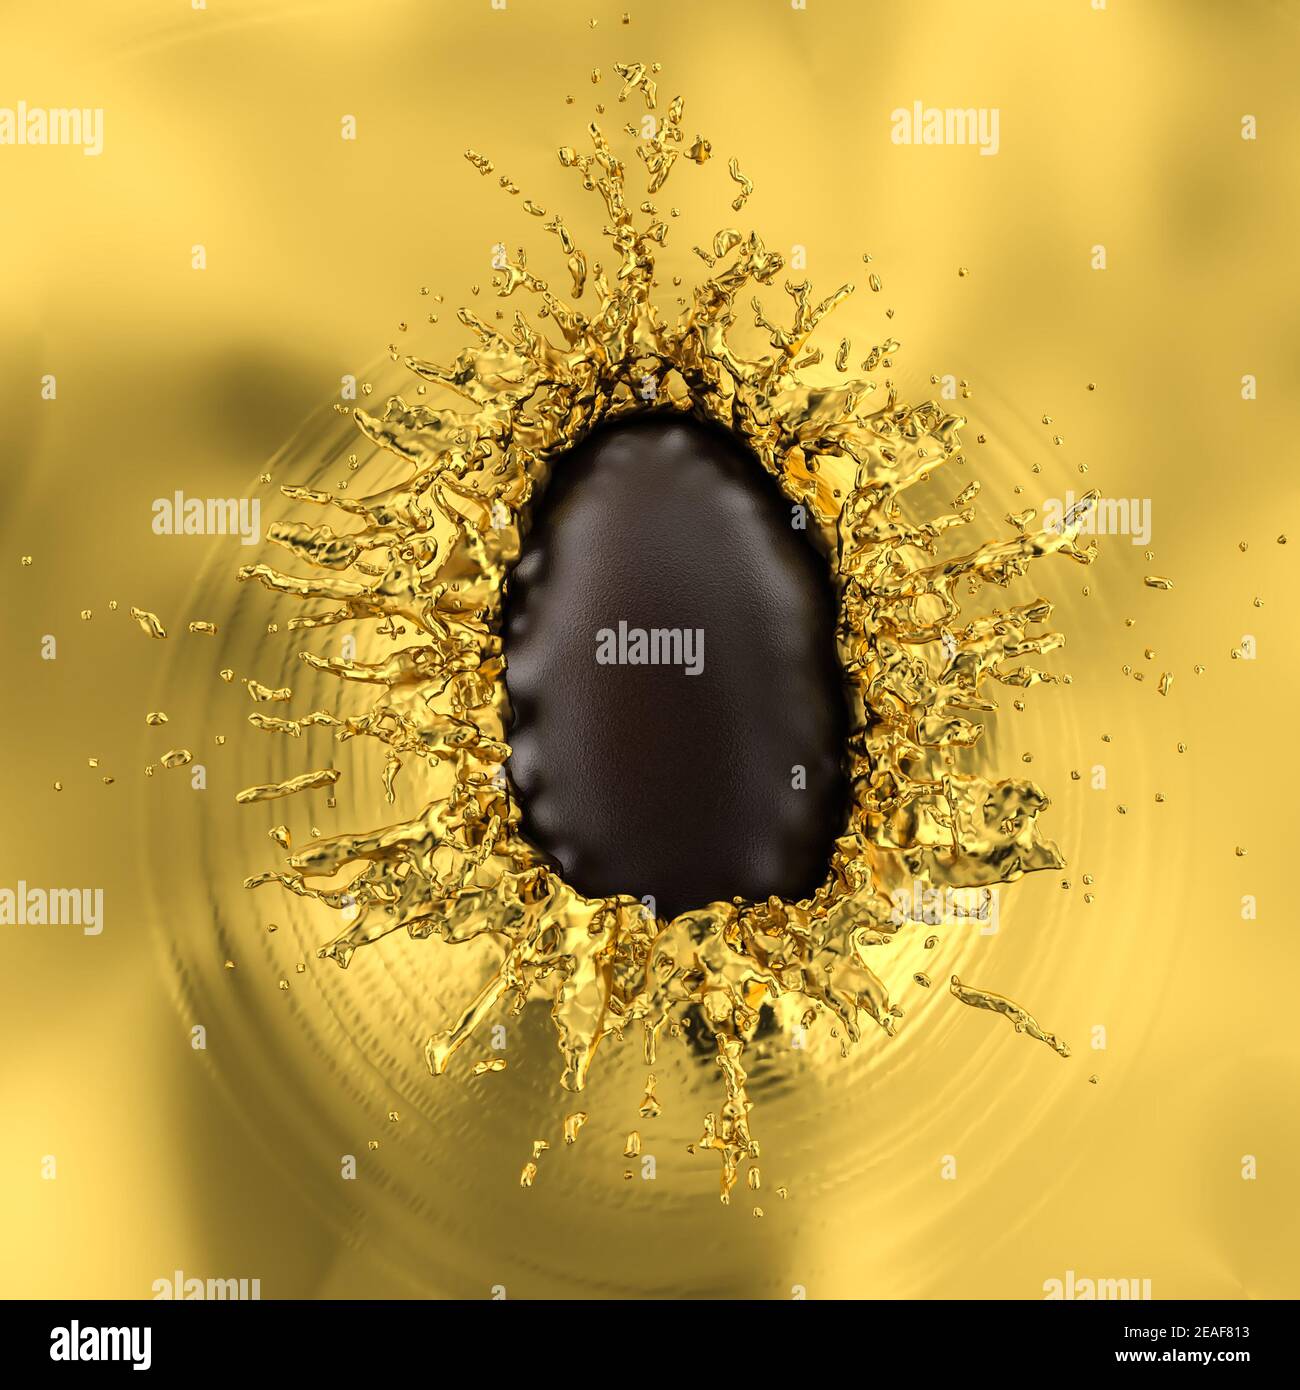 chocolate egg falling and impacting liquid gold. 3d render. Stock Photo